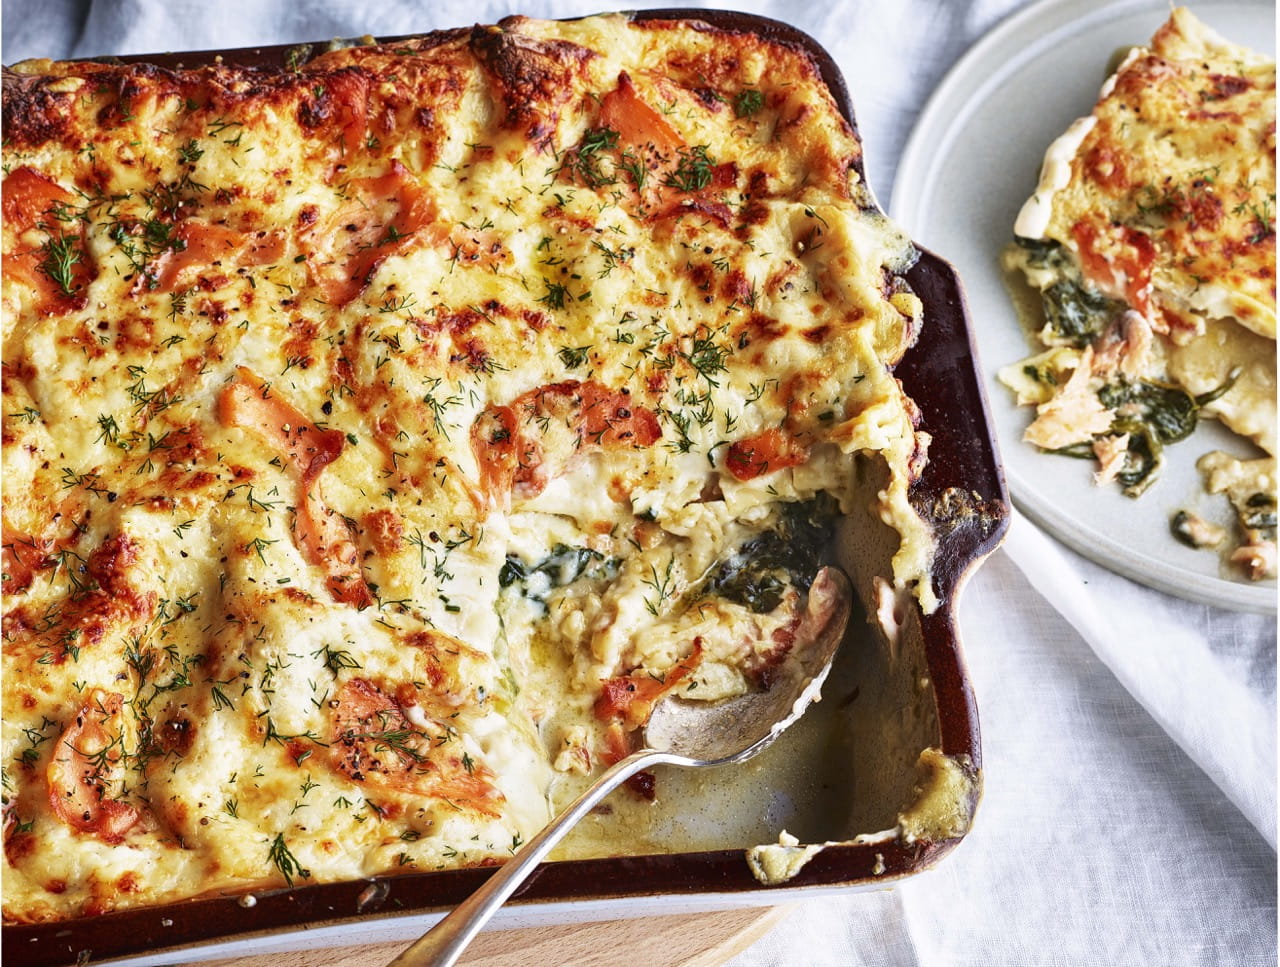 Smoked Salmon and Spinach Lasagne